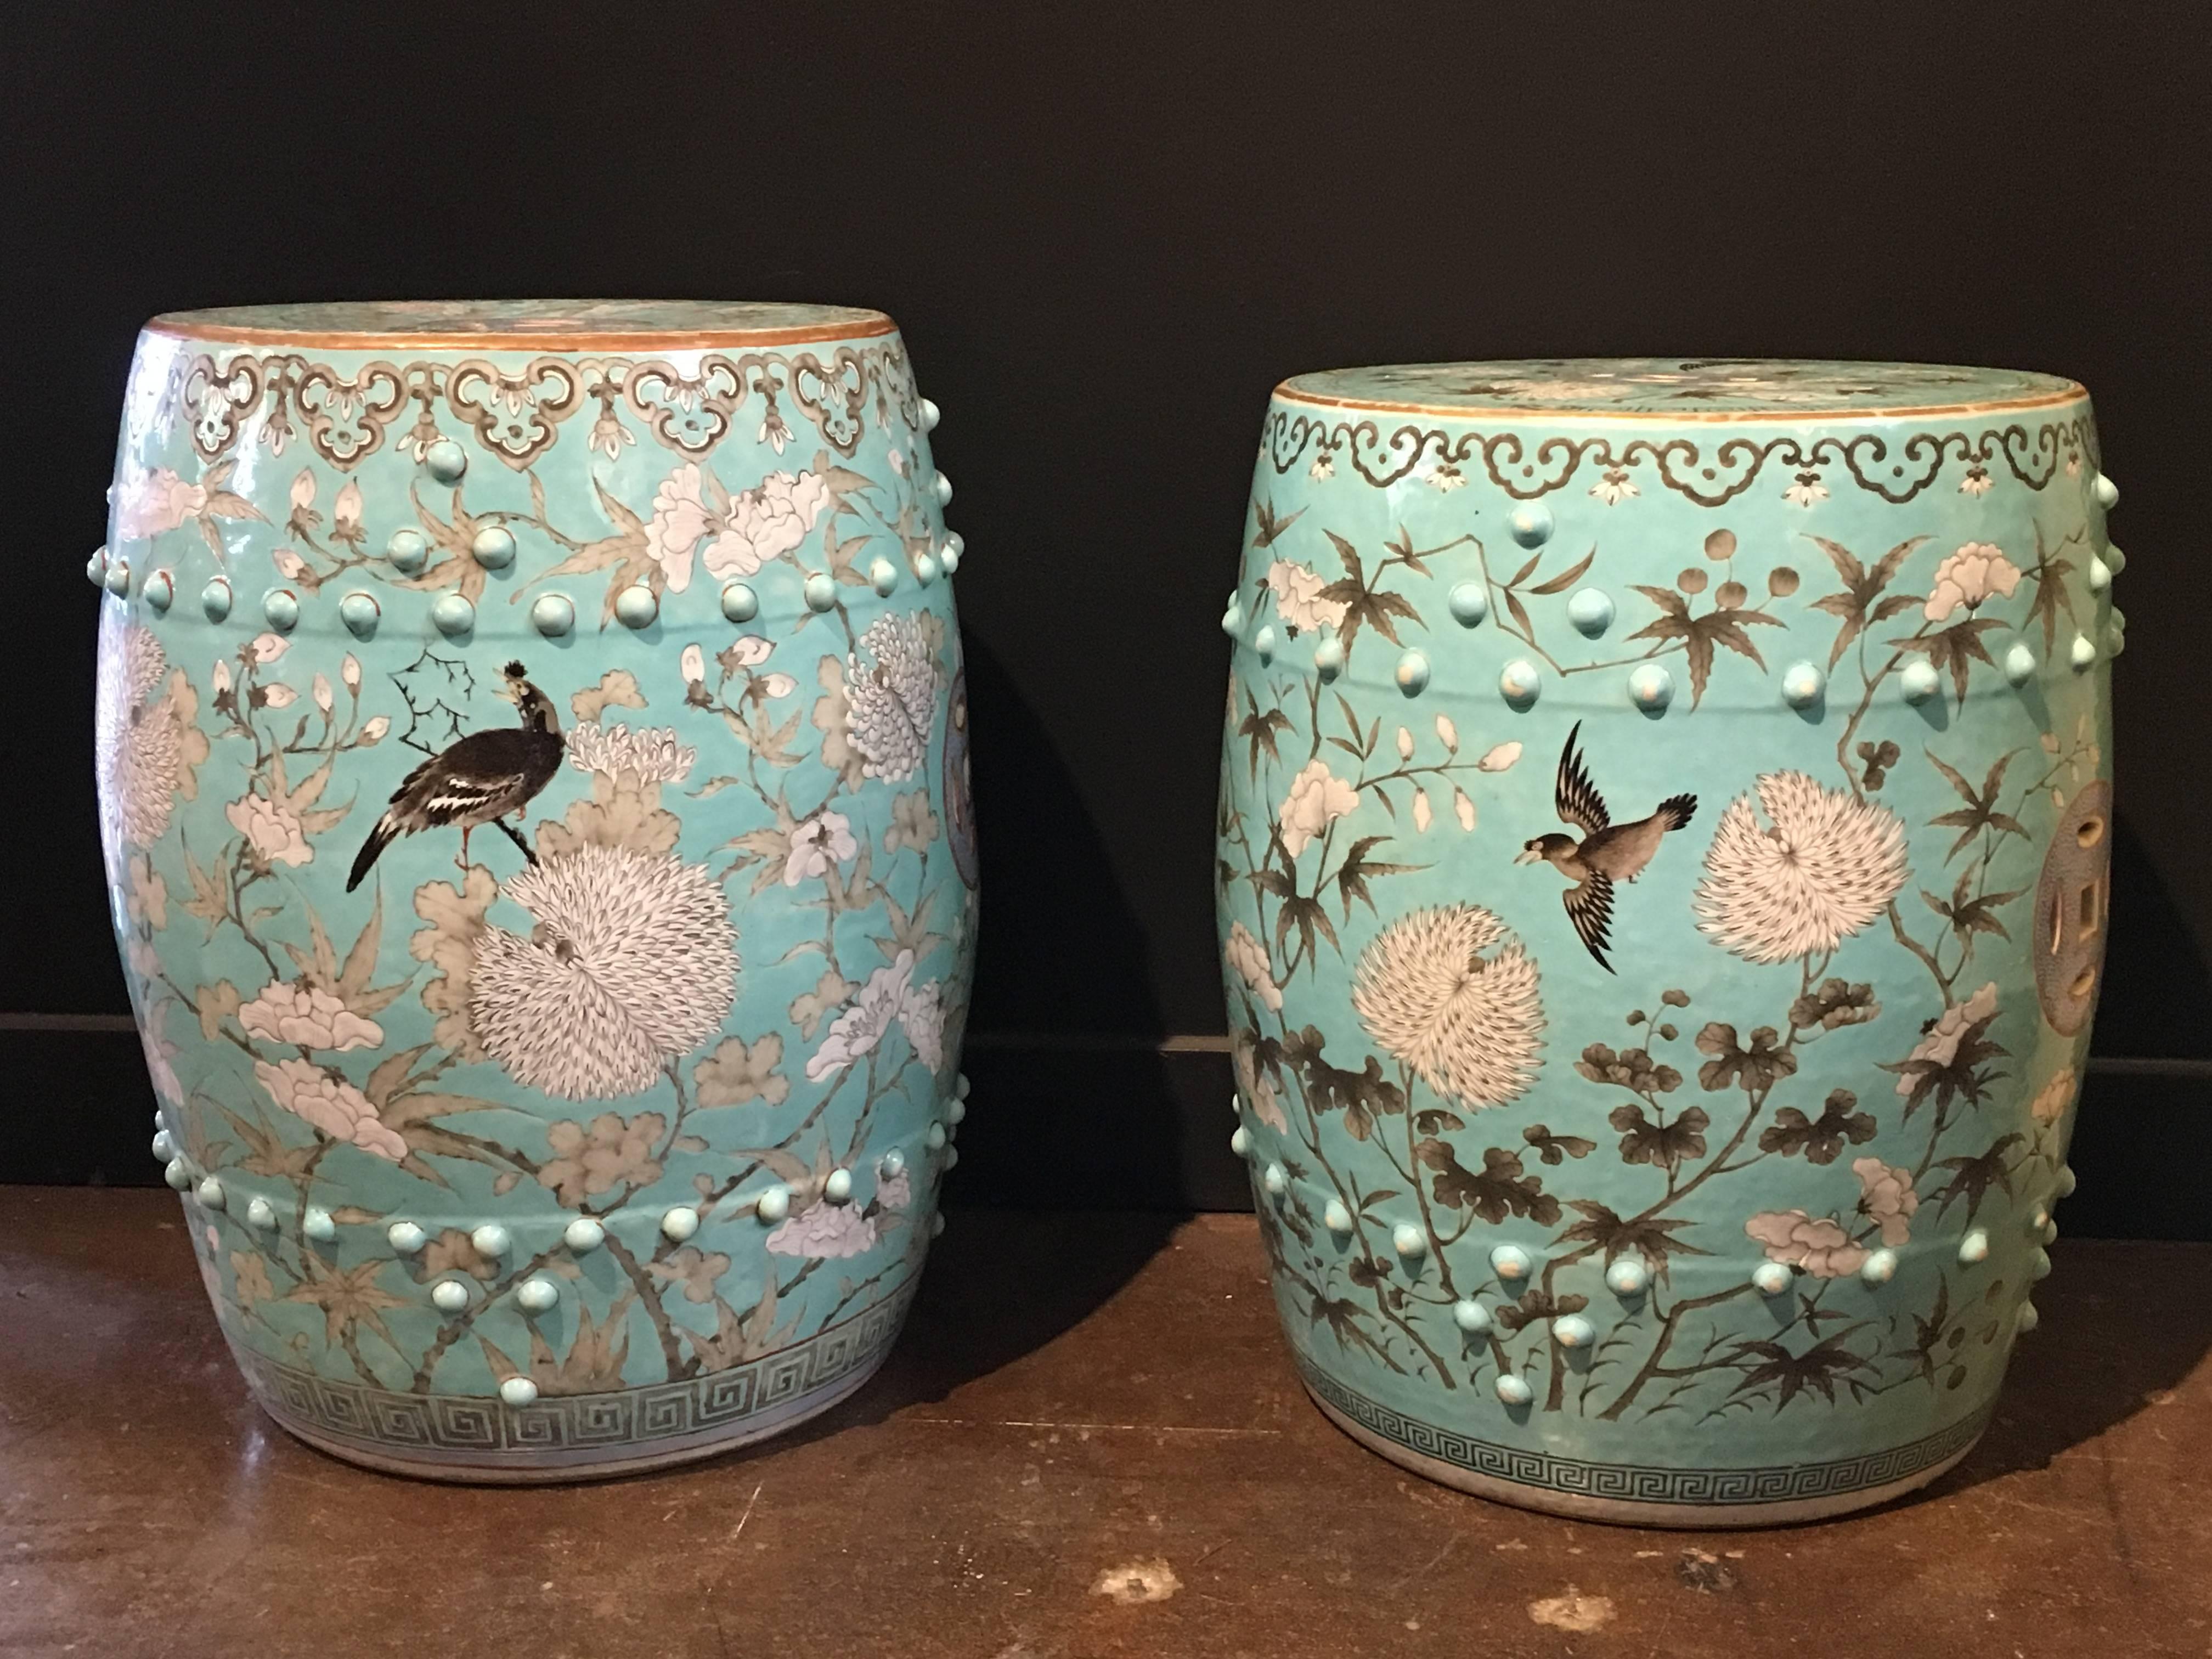 An extremely unusual near pair of Qing dynasty Chinese porcelain garden seats or stools, Guangxu Period (reigned 1875 to 1908), late 19th century.
The garden stools or traditional drum form and featuring a gorgeous muted turquoise ground and